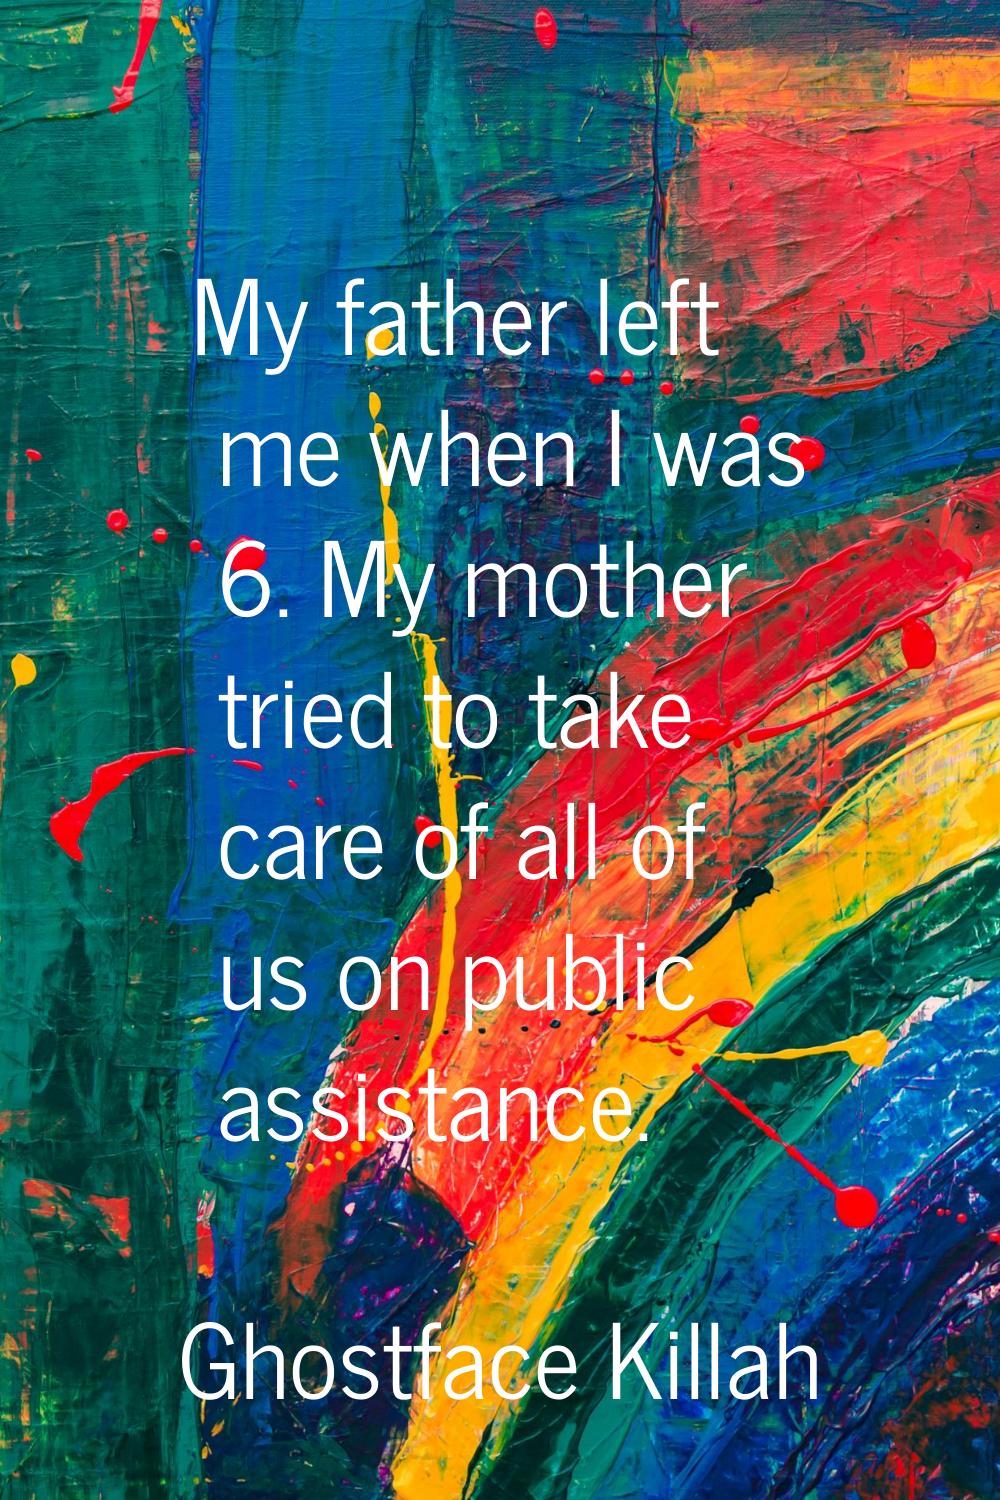 My father left me when I was 6. My mother tried to take care of all of us on public assistance.